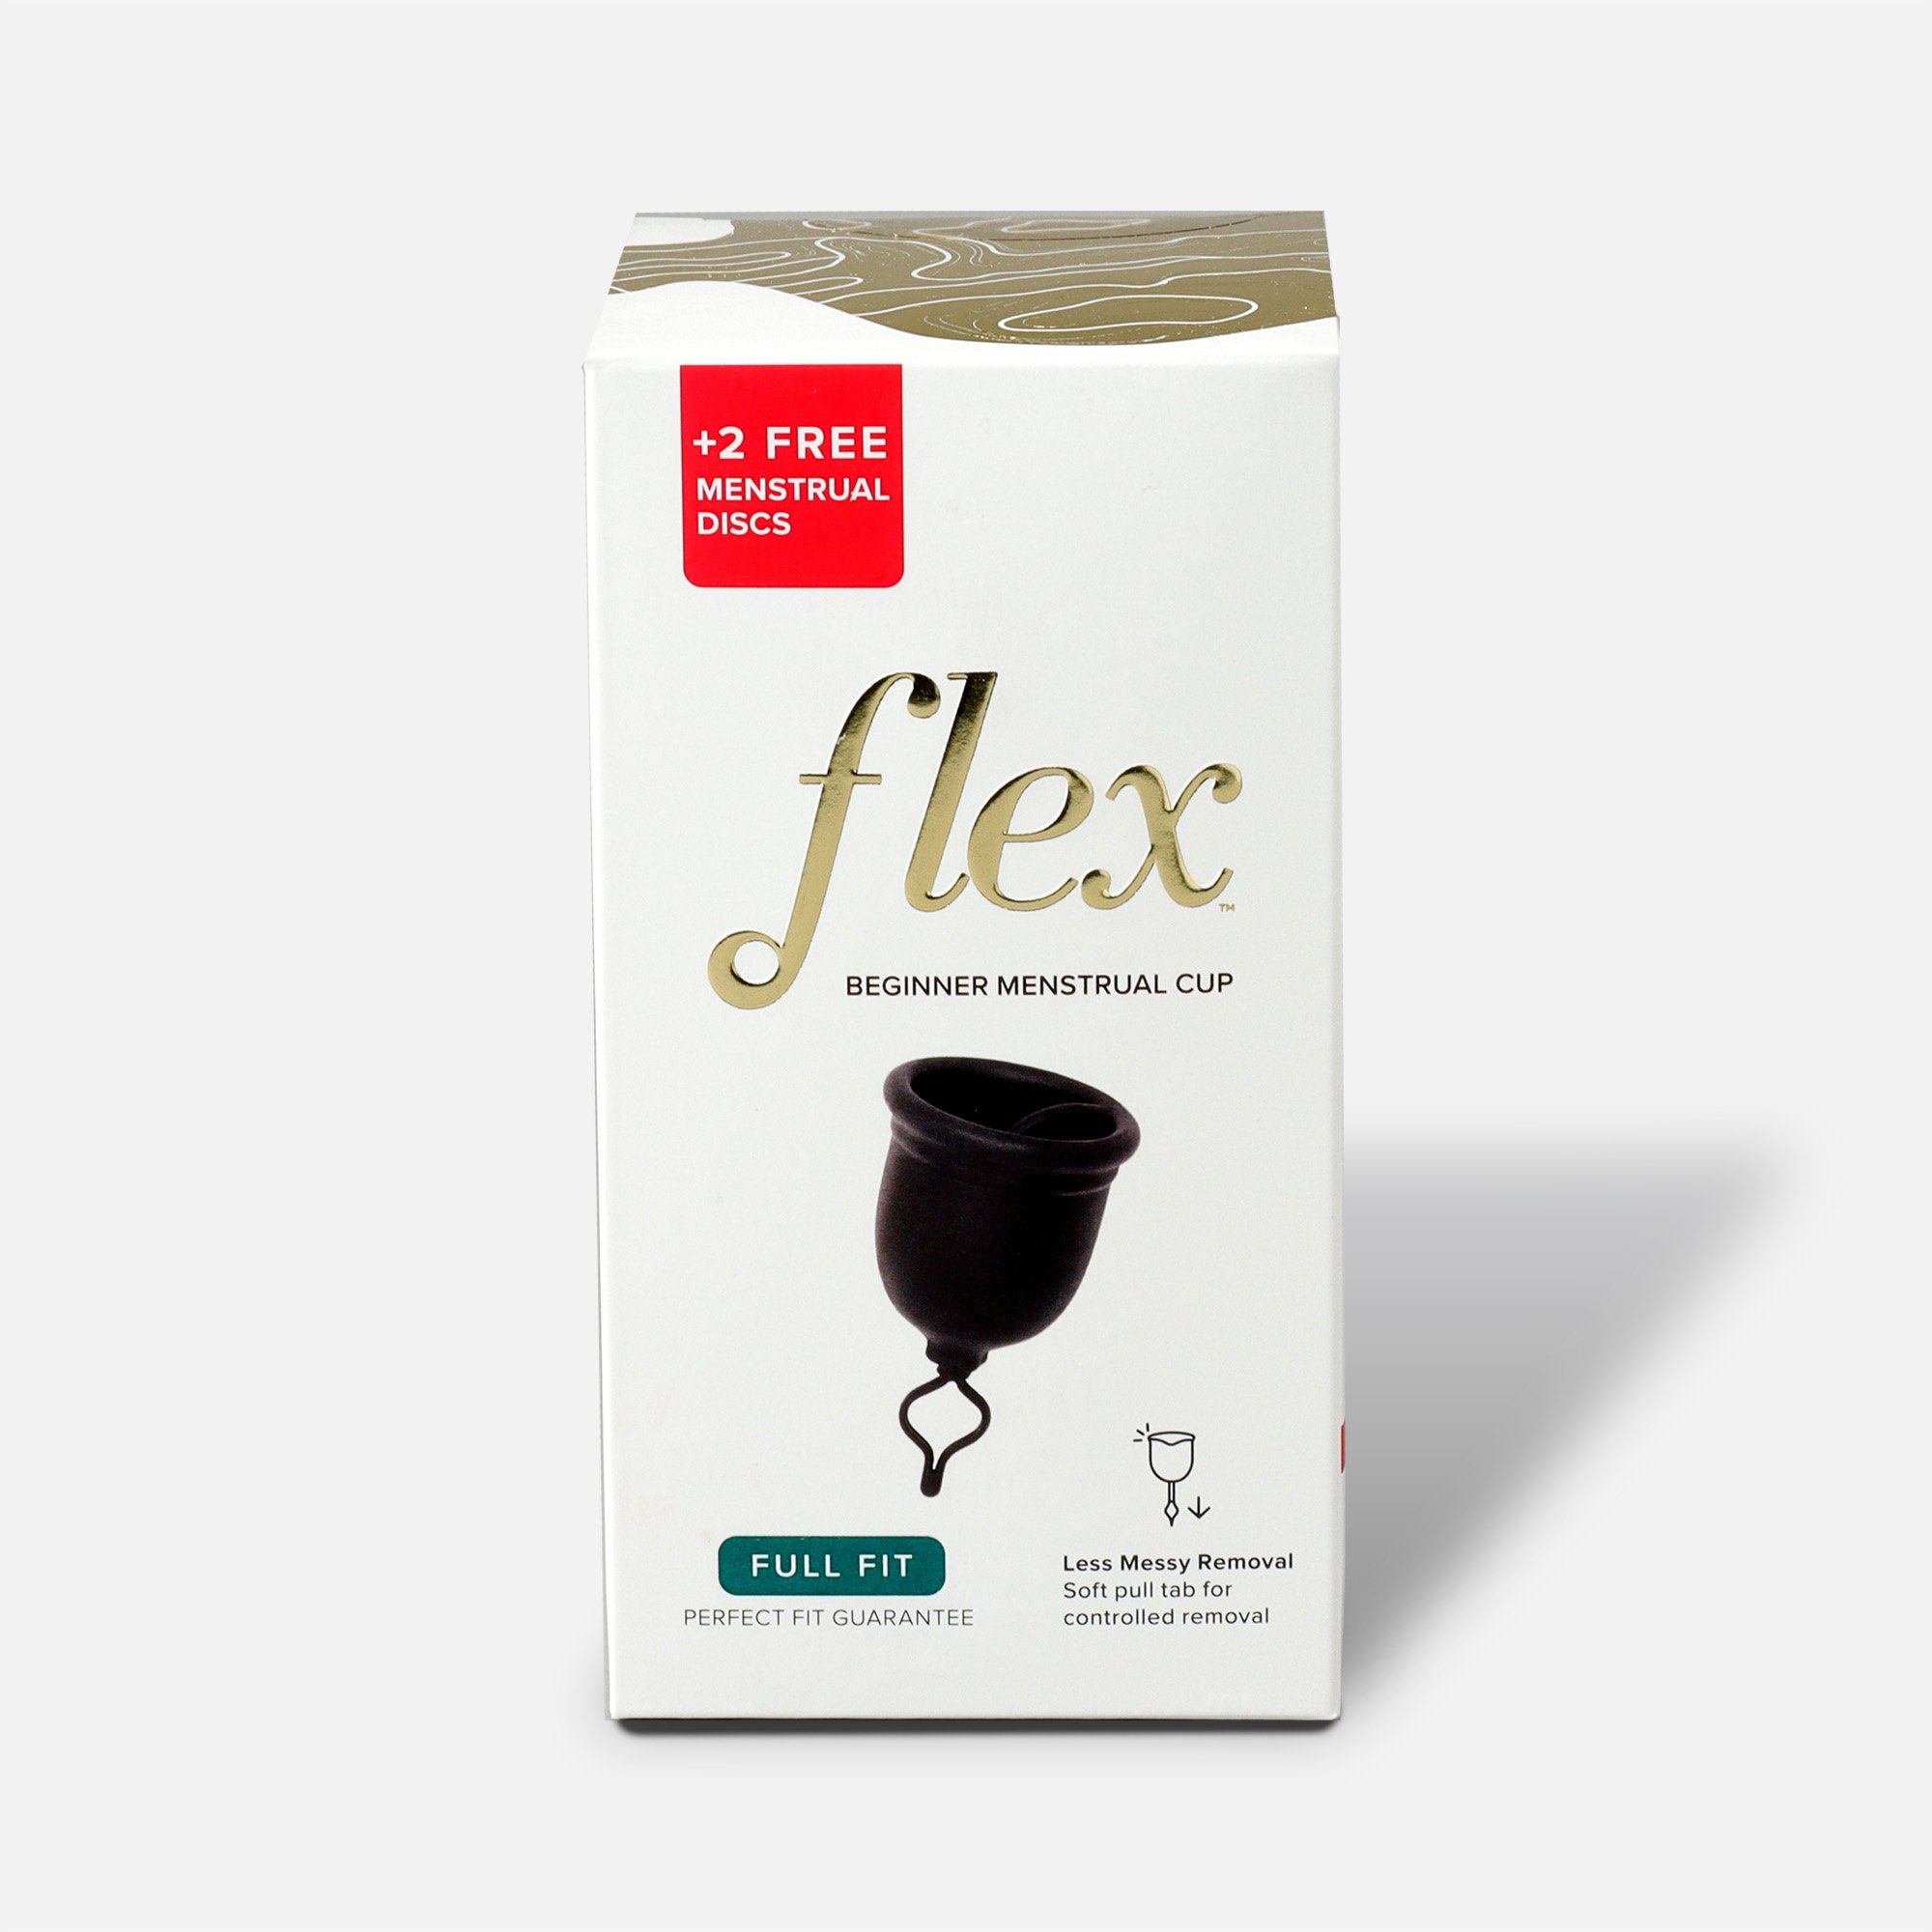 Flex Cup: Menstrual cup with patented pull-tab